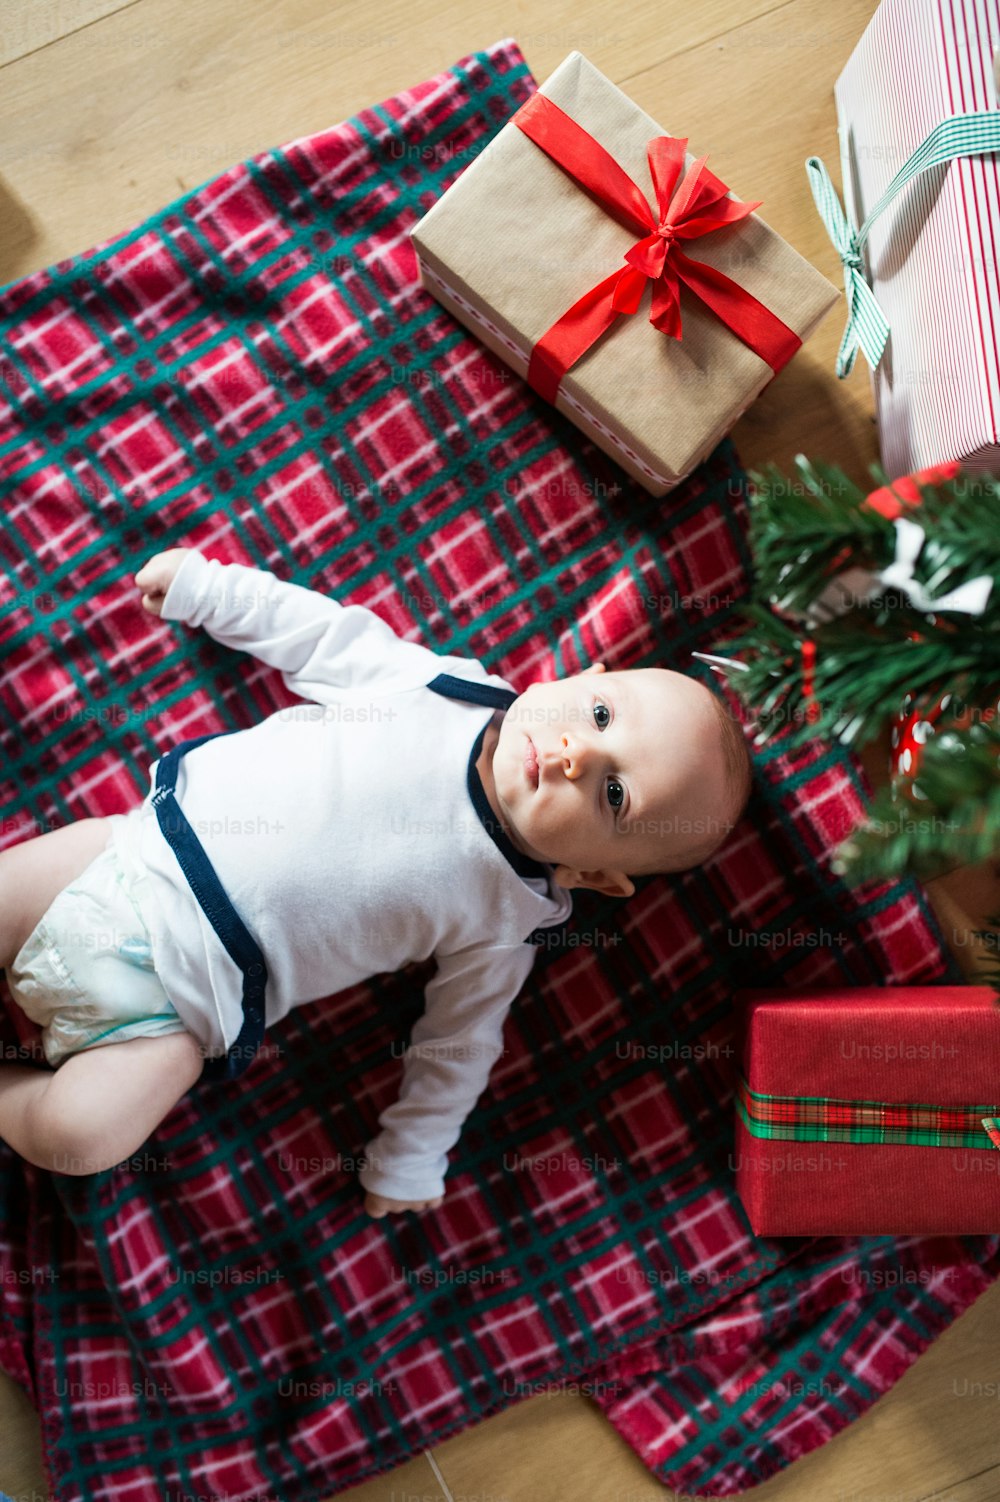 Cute little baby boy under Christmas tree lying among presents on checked blanket.